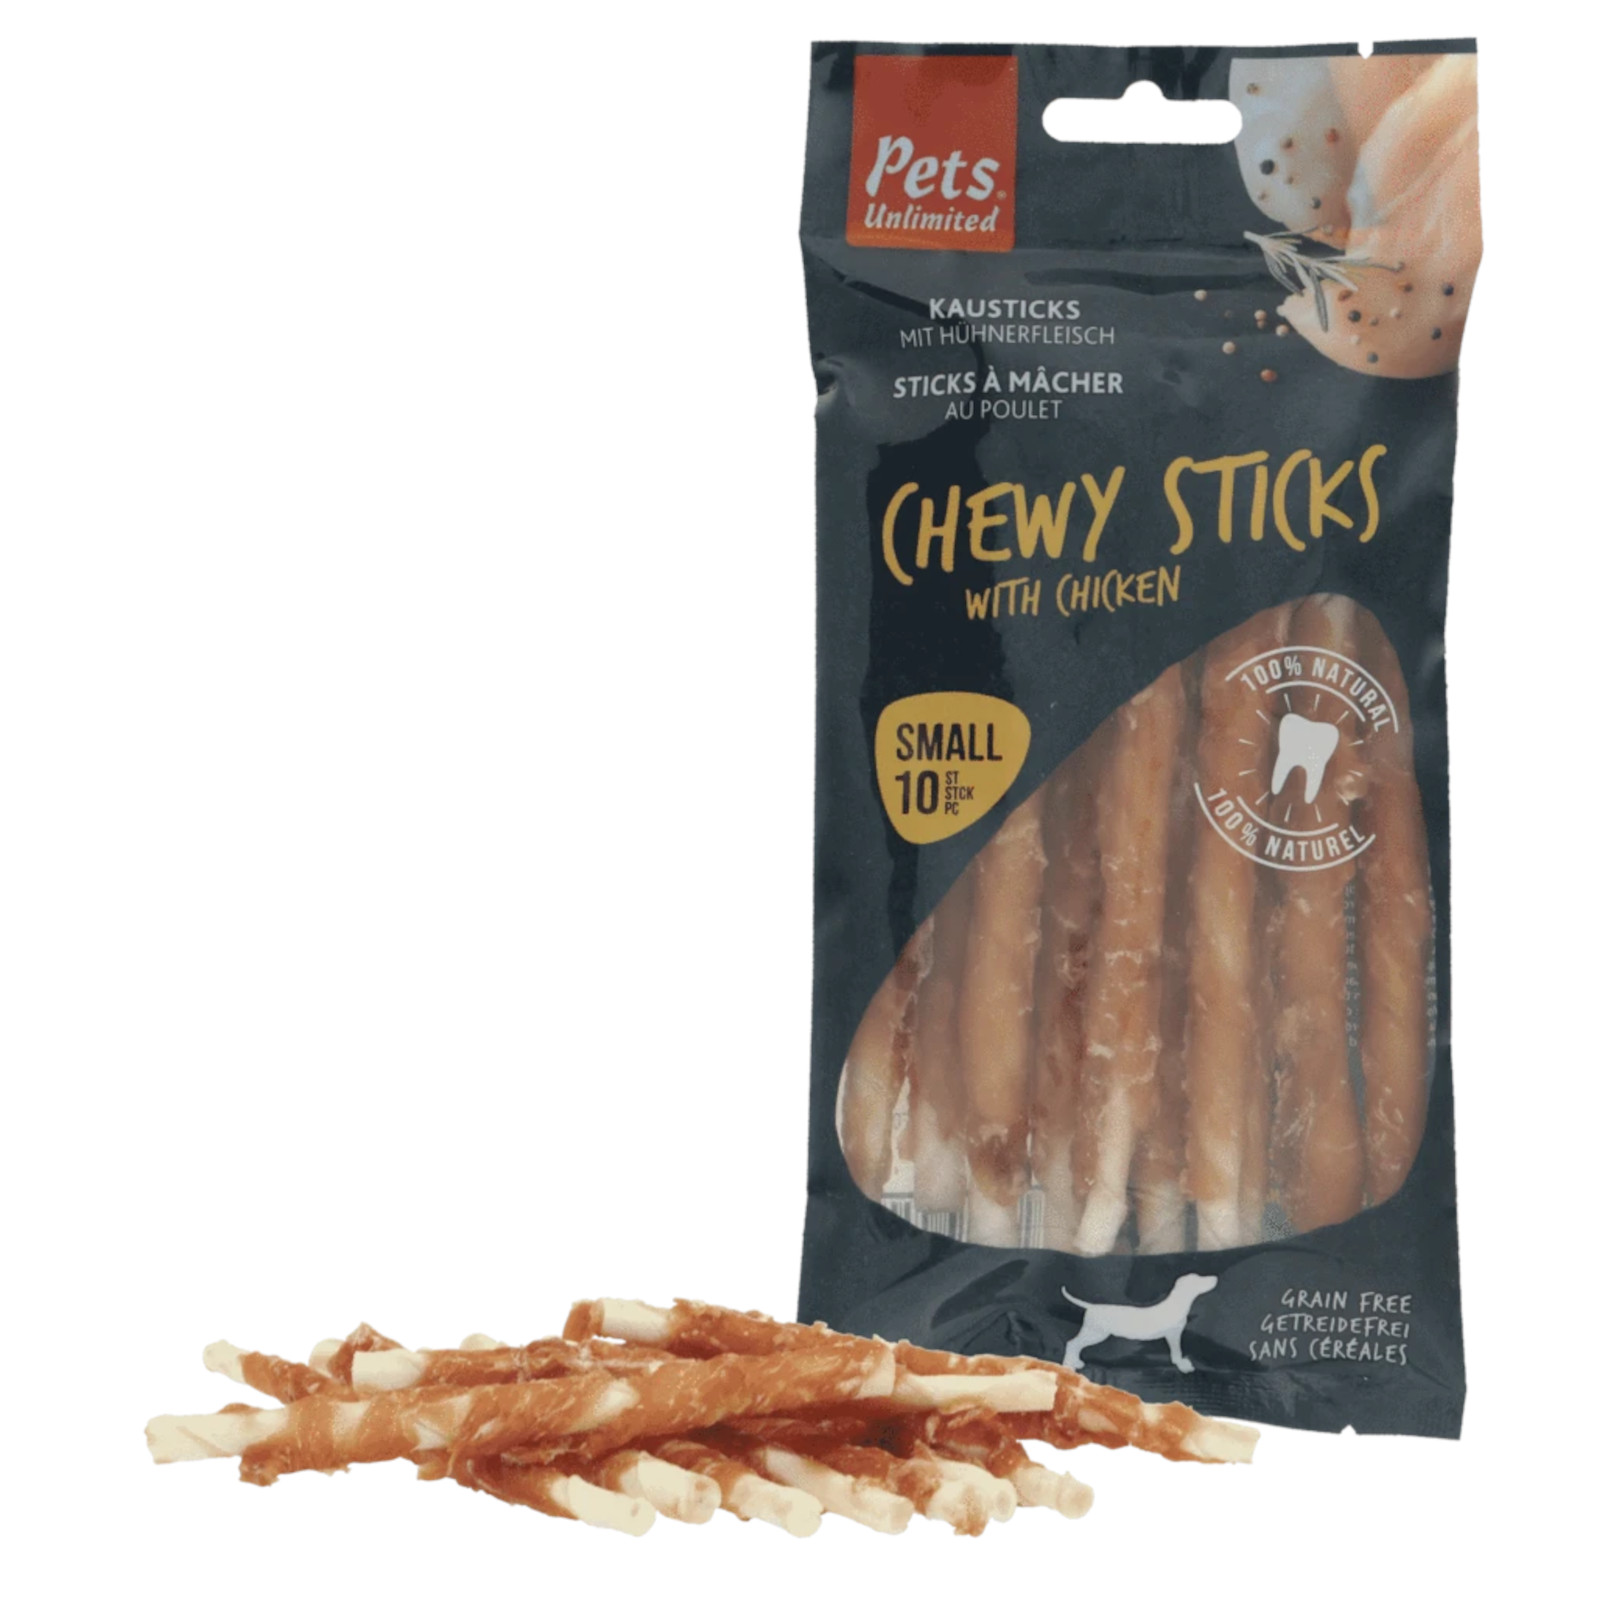 Pets Unlimited Chewy Stick Chicken - Small 10 Pieces